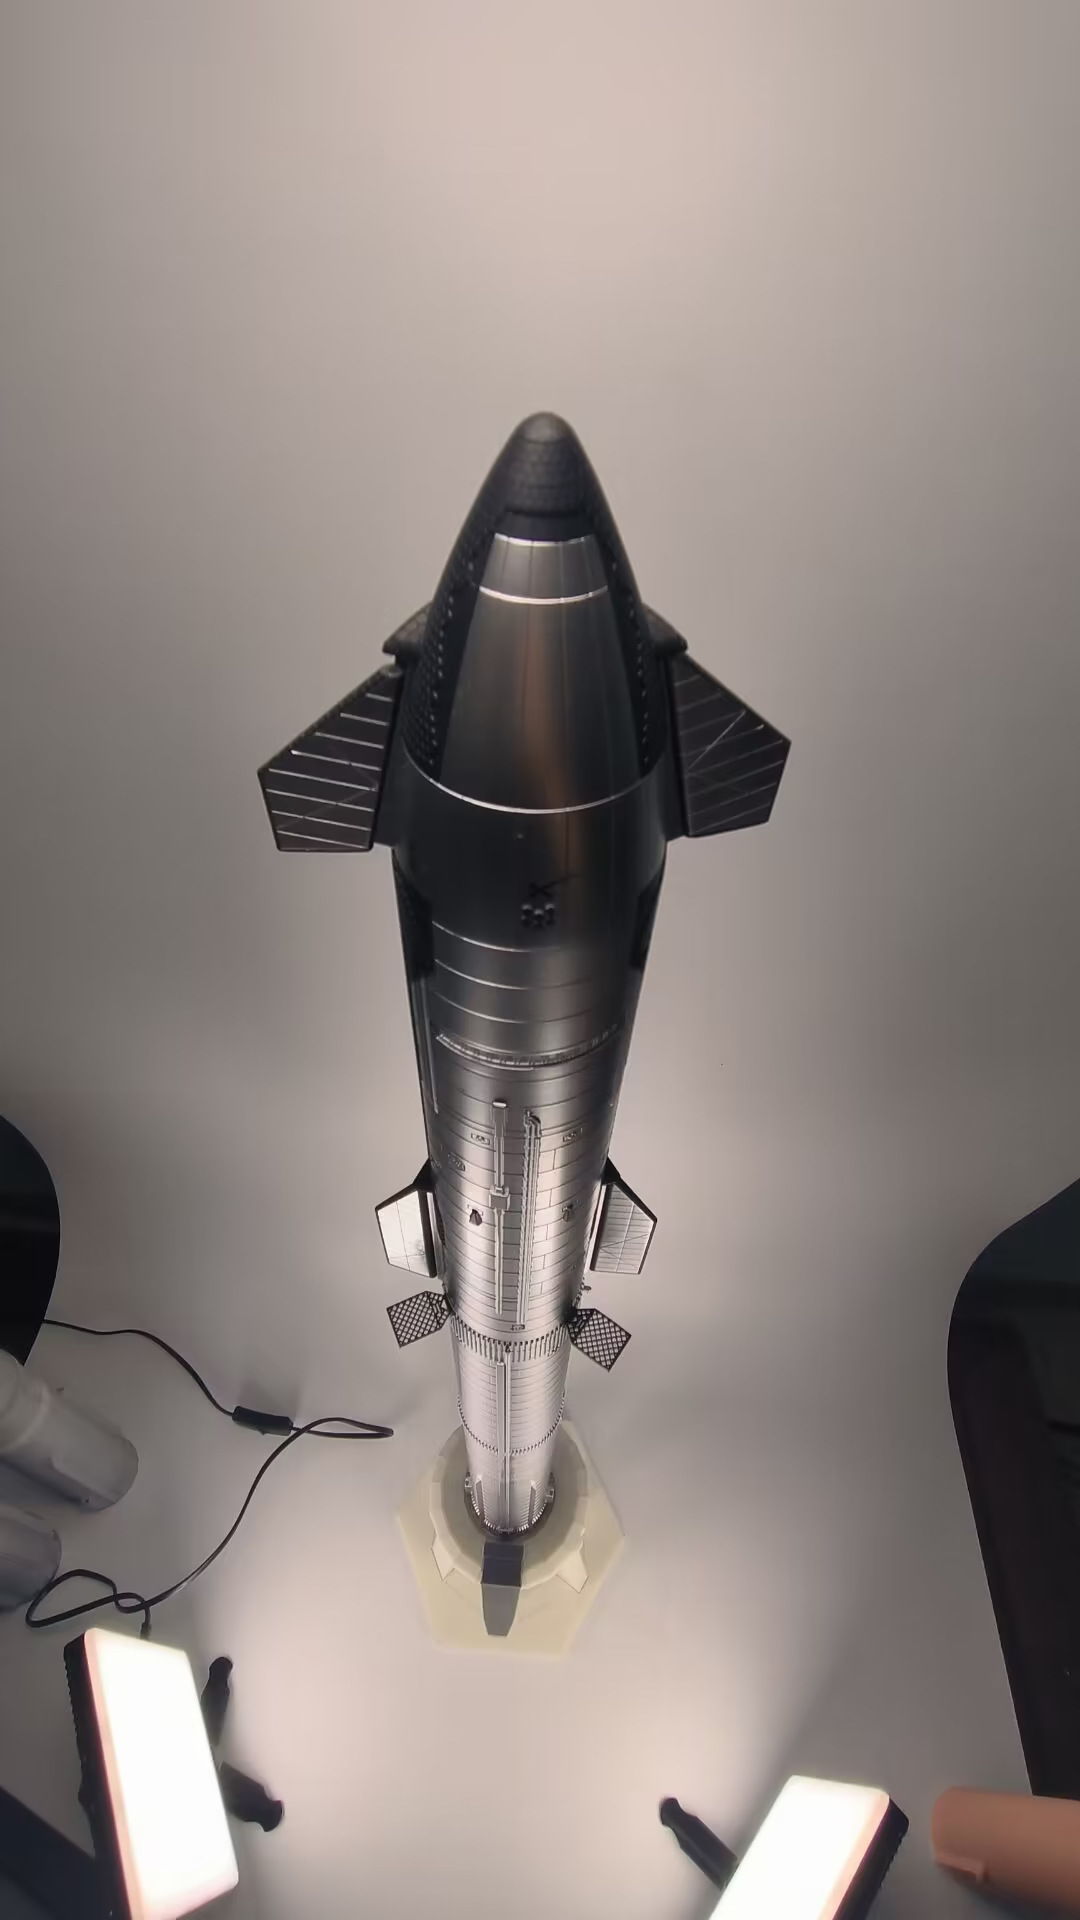 SpaceX Starship 1/144 Superheavy Booster7 model - resin printed super rocket model